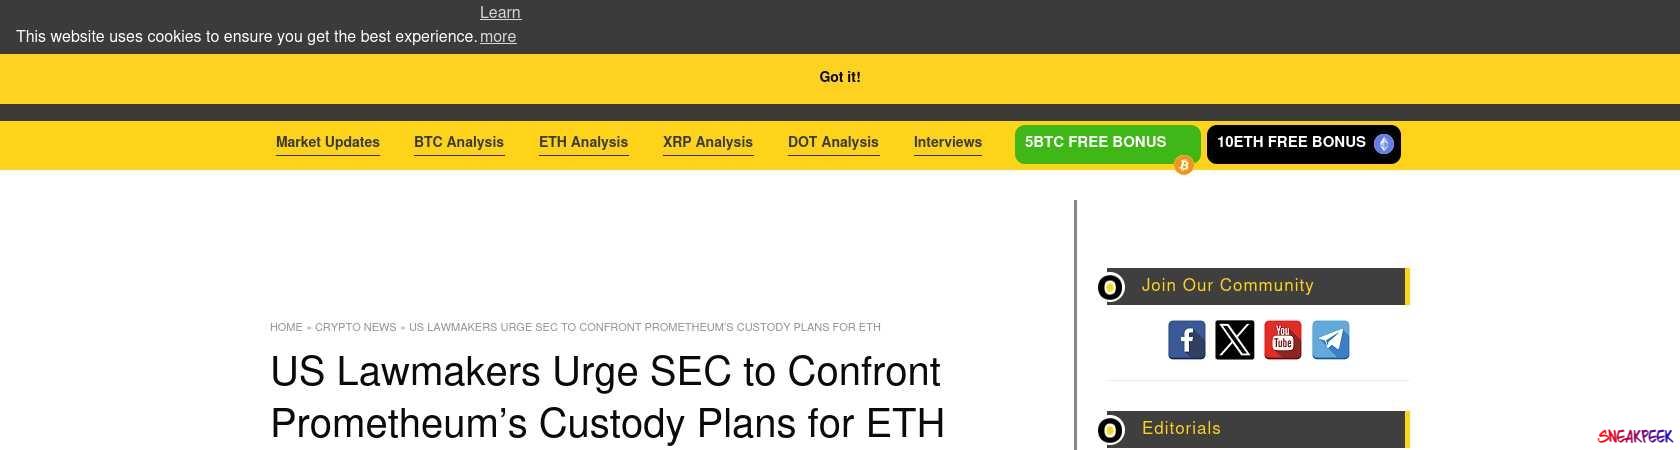 Read the full Article:  ⭲ US Lawmakers Urge SEC to Confront Prometheum’s Custody Plans for ETH